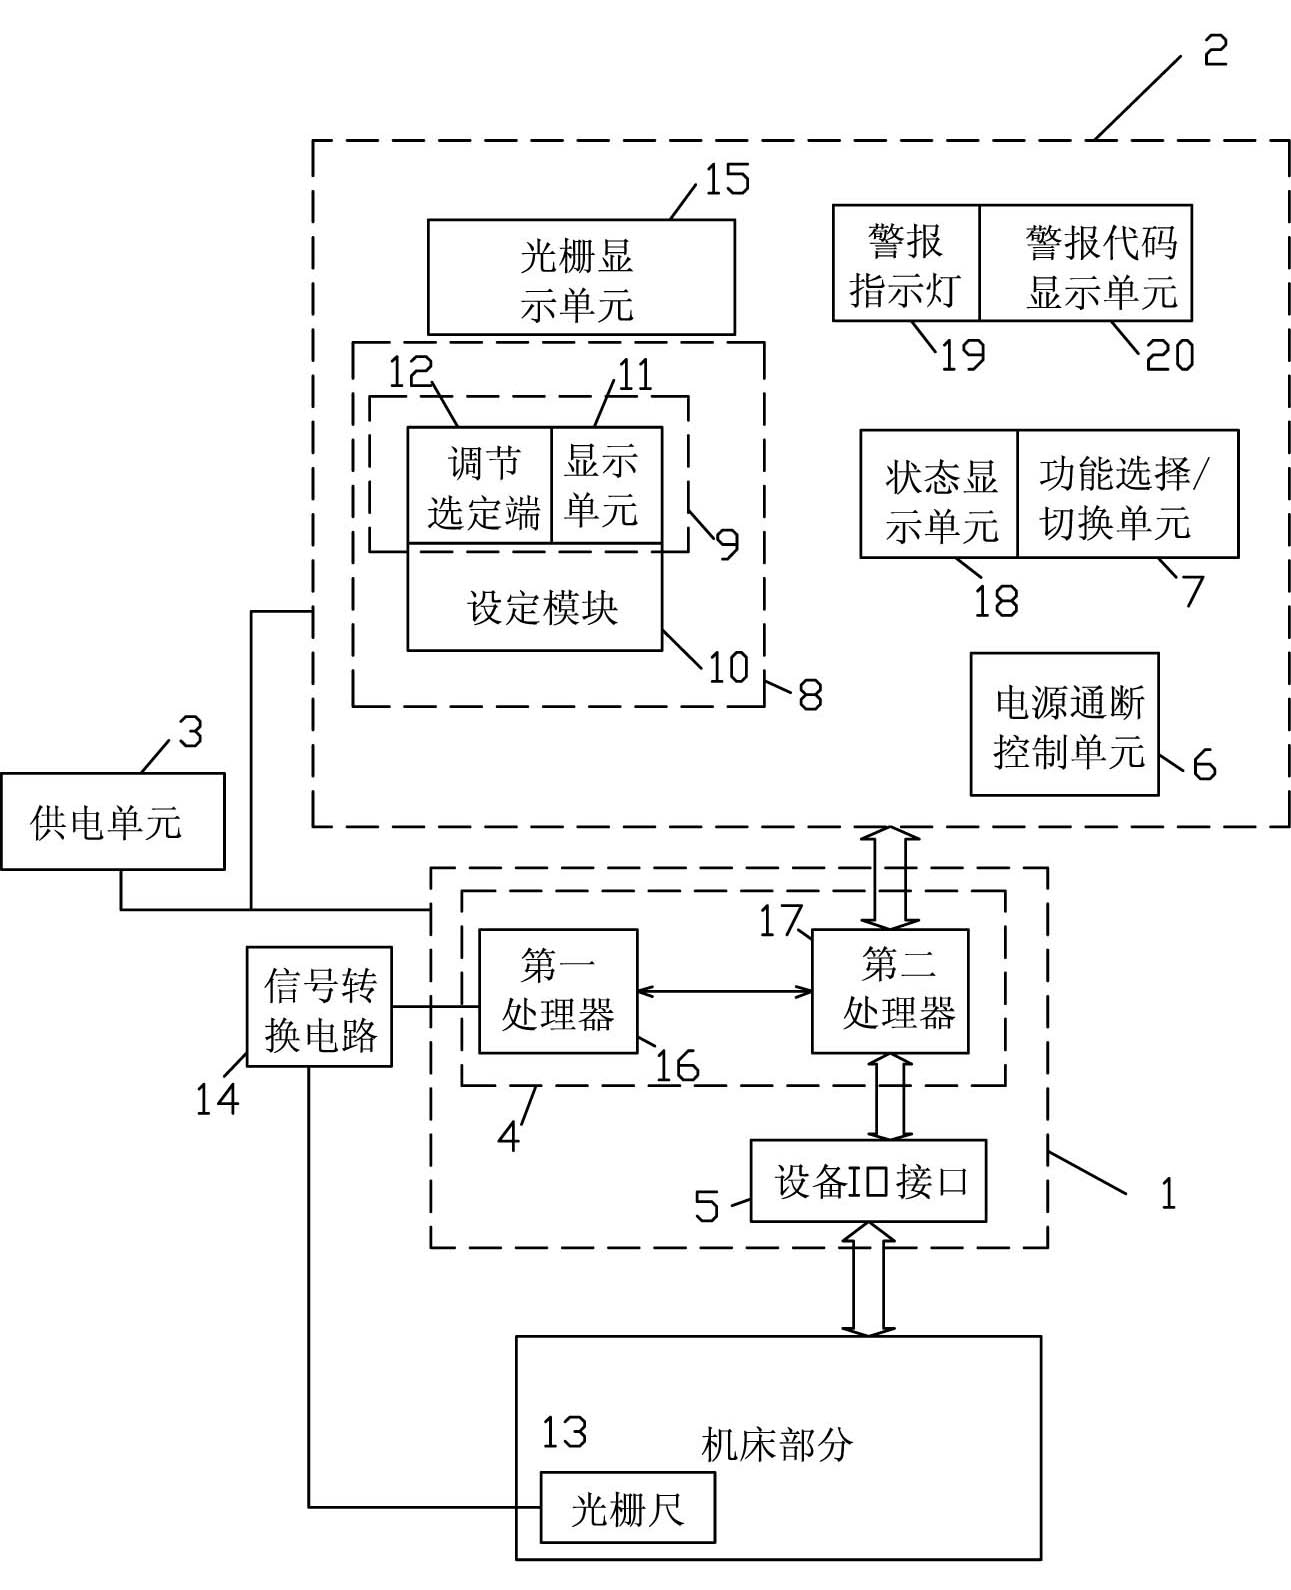 Numerical control system of grinding machine